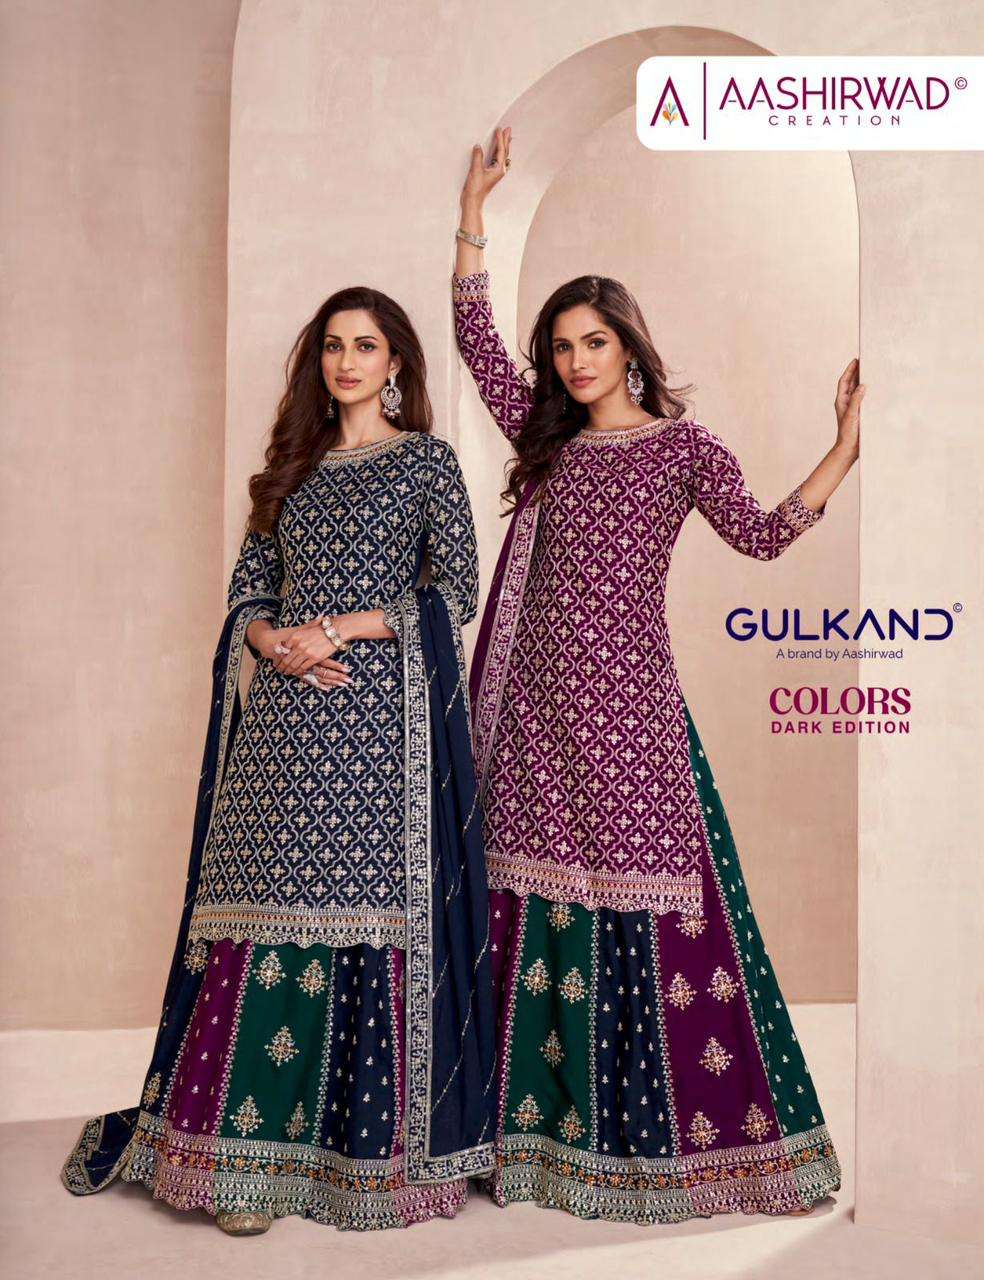 aashirwad creation present new free size stitched readymade collection xl size colors n colors  dark edition 9701 series n 9856 series designer partywear peplum design readymade suit